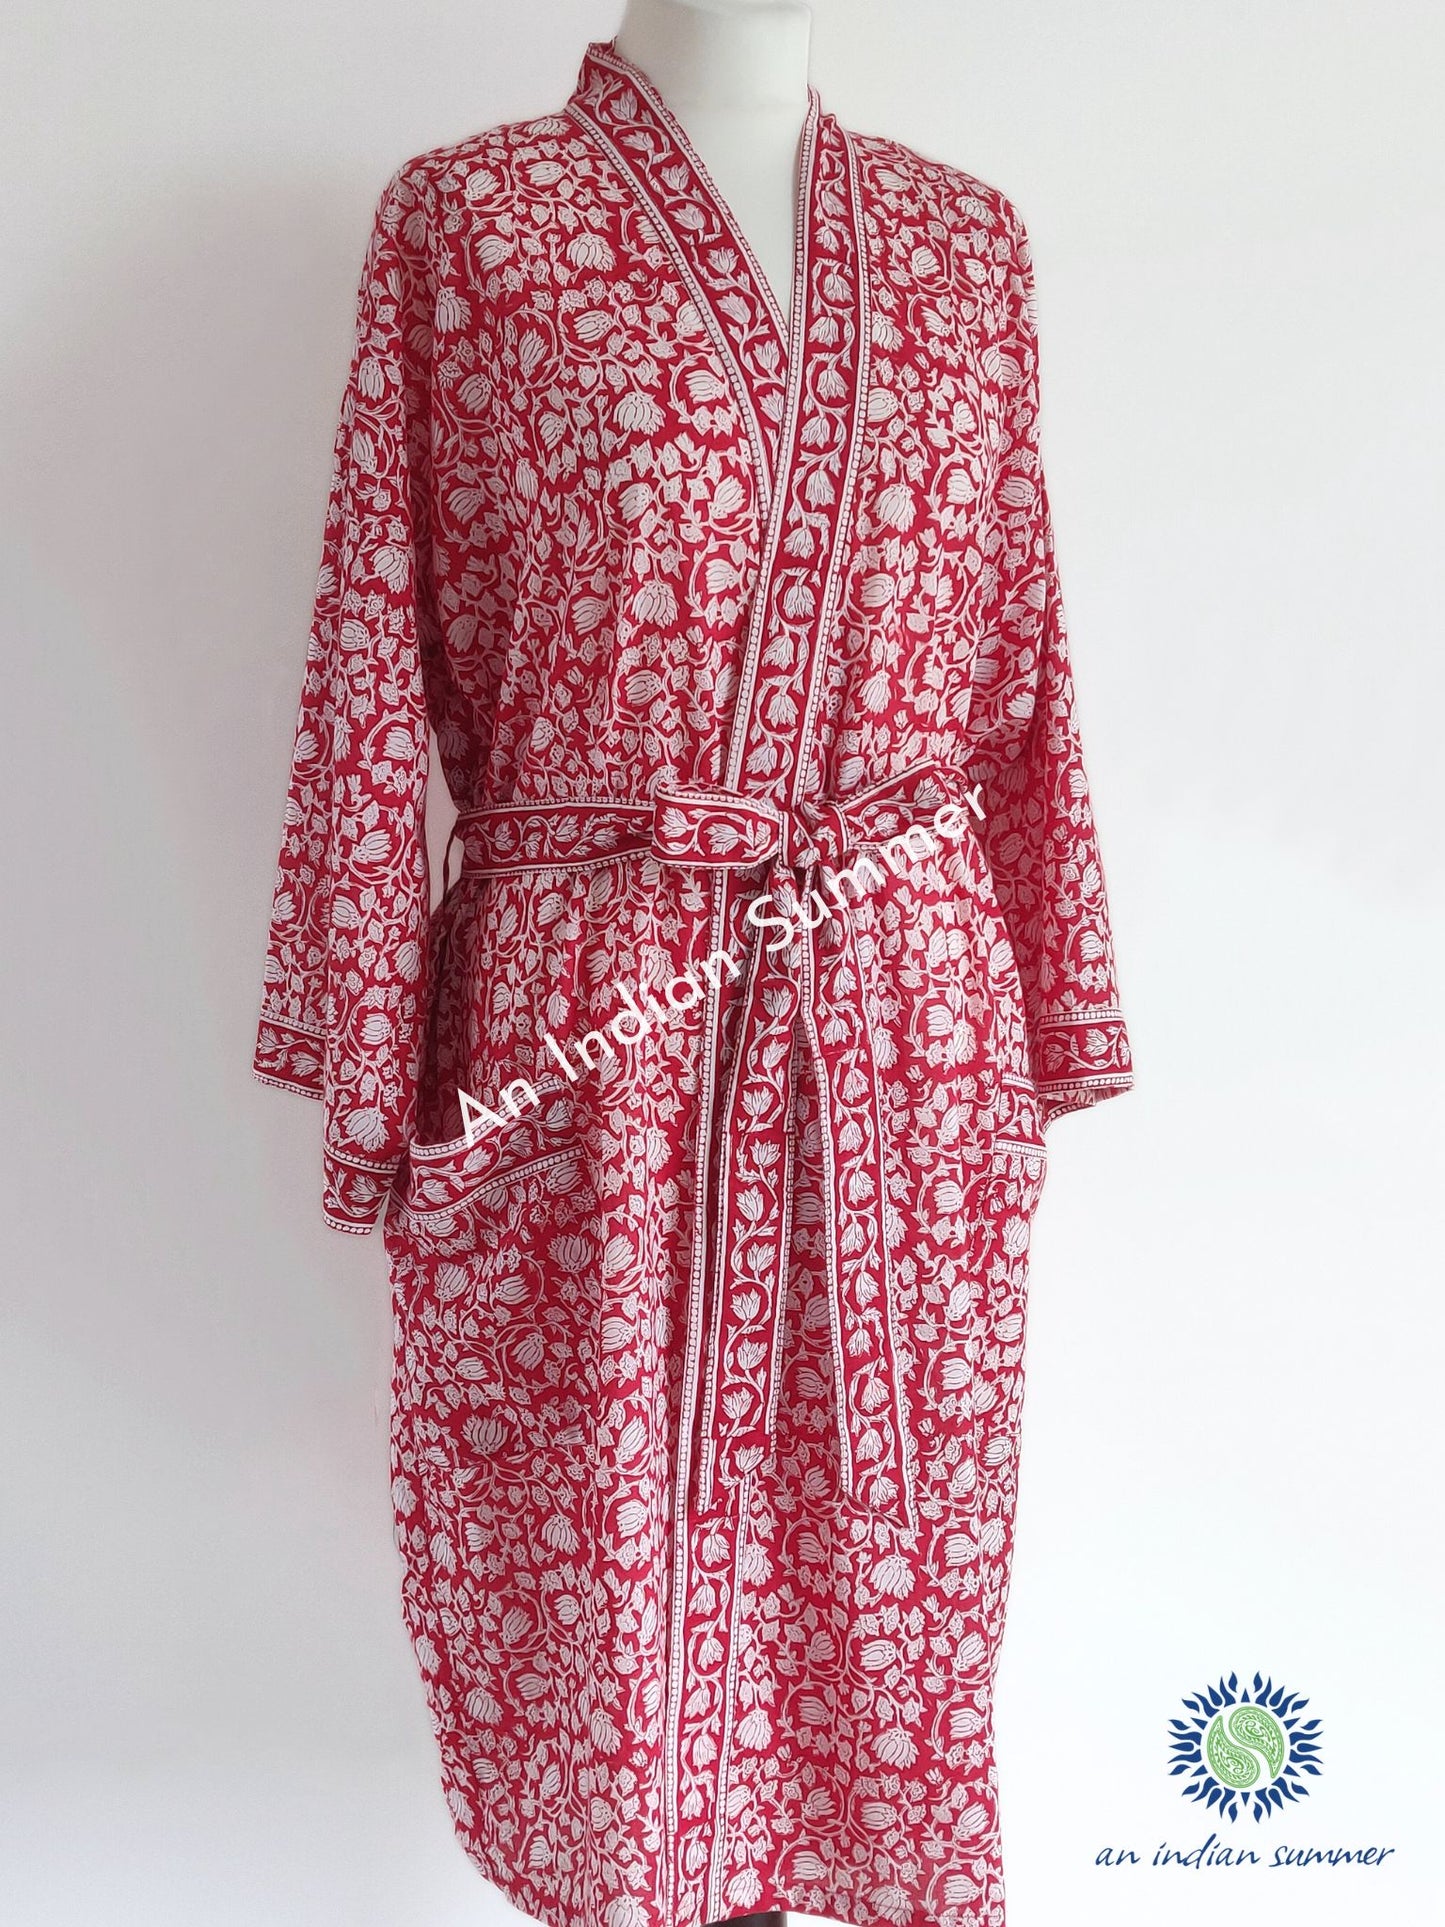 Kimono Robe | Red | Lotus Block Print | Hand Block Printed | Cotton Voile | An Indian Summer | Seasonless Timeless Sustainable Ethical Authentic Artisan Conscious Clothing Lifestyle Brand